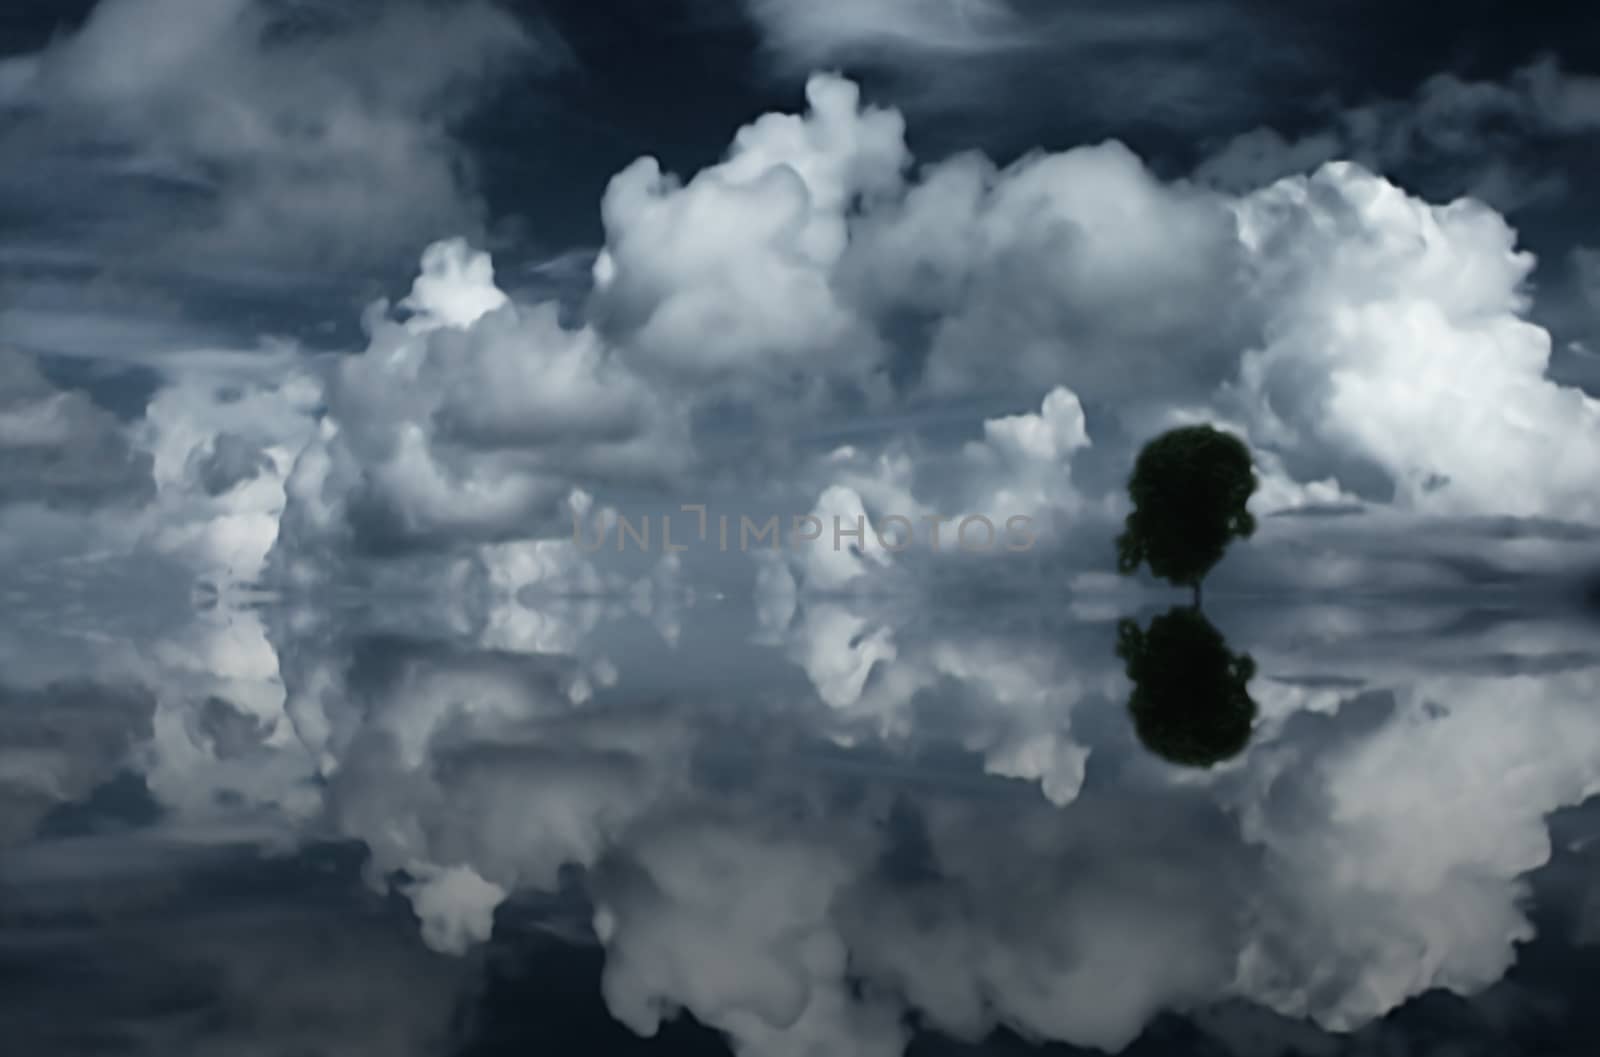 Clouds, tree and reflecting water